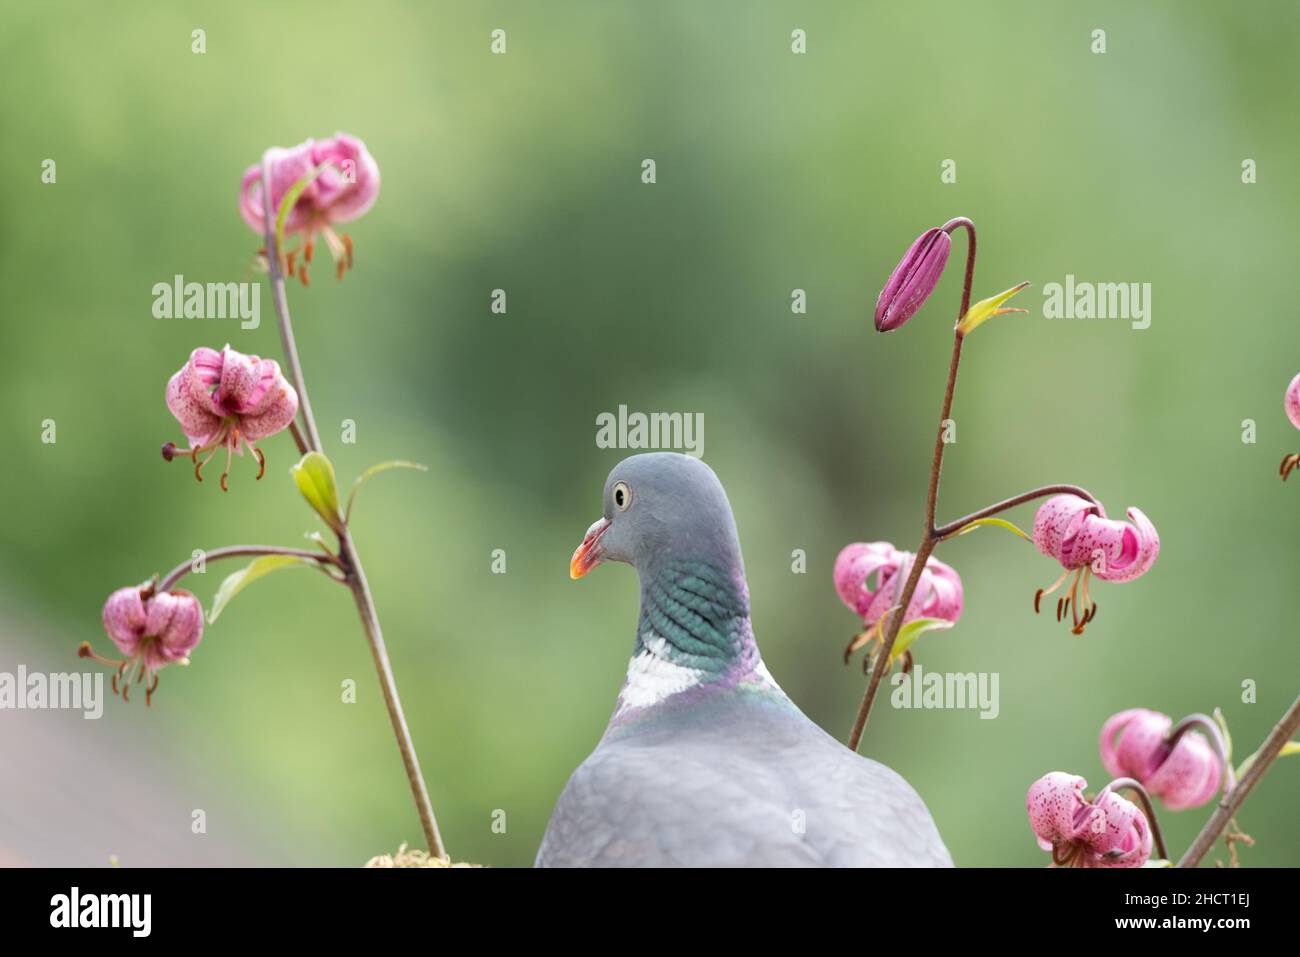 pigeon stand between martagon lily flowers Stock Photo